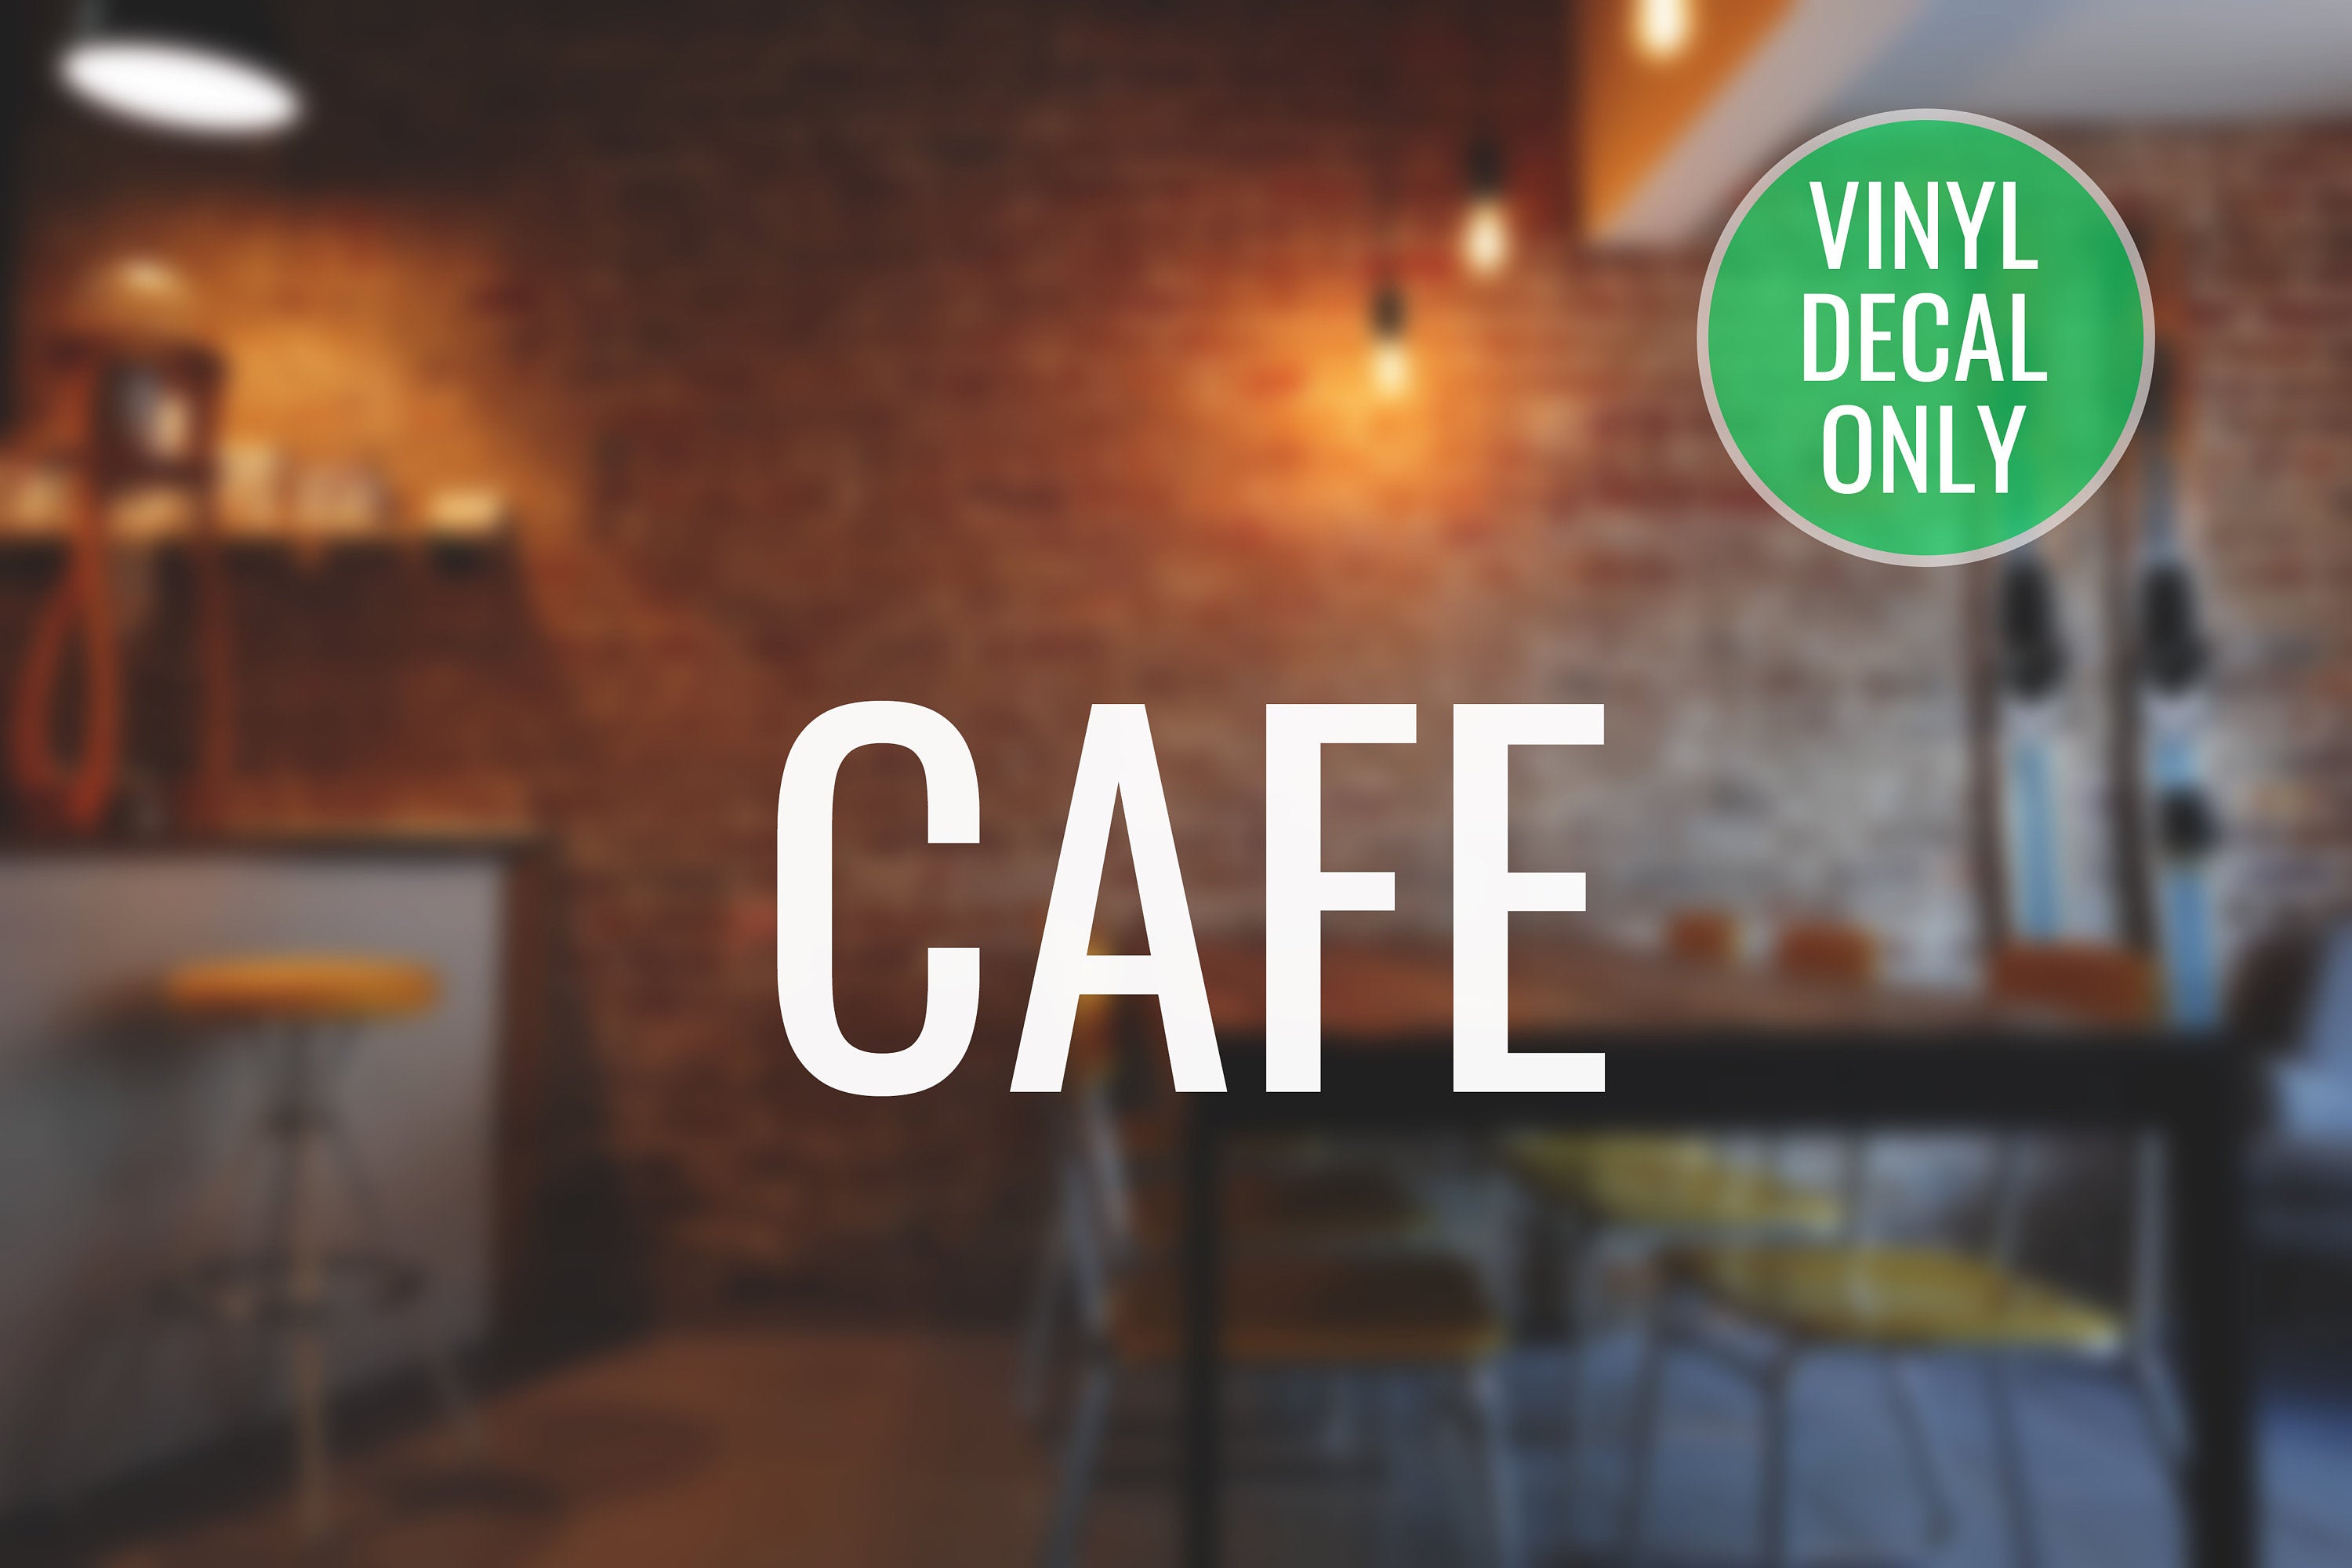 Cafe Decal - Vinyl Decal for Fast food, Cafe, Coffee Bars, Coffee Shops, Bistros, Eatery, Cafeteria, Food Truck, Groceries, Restaurants!